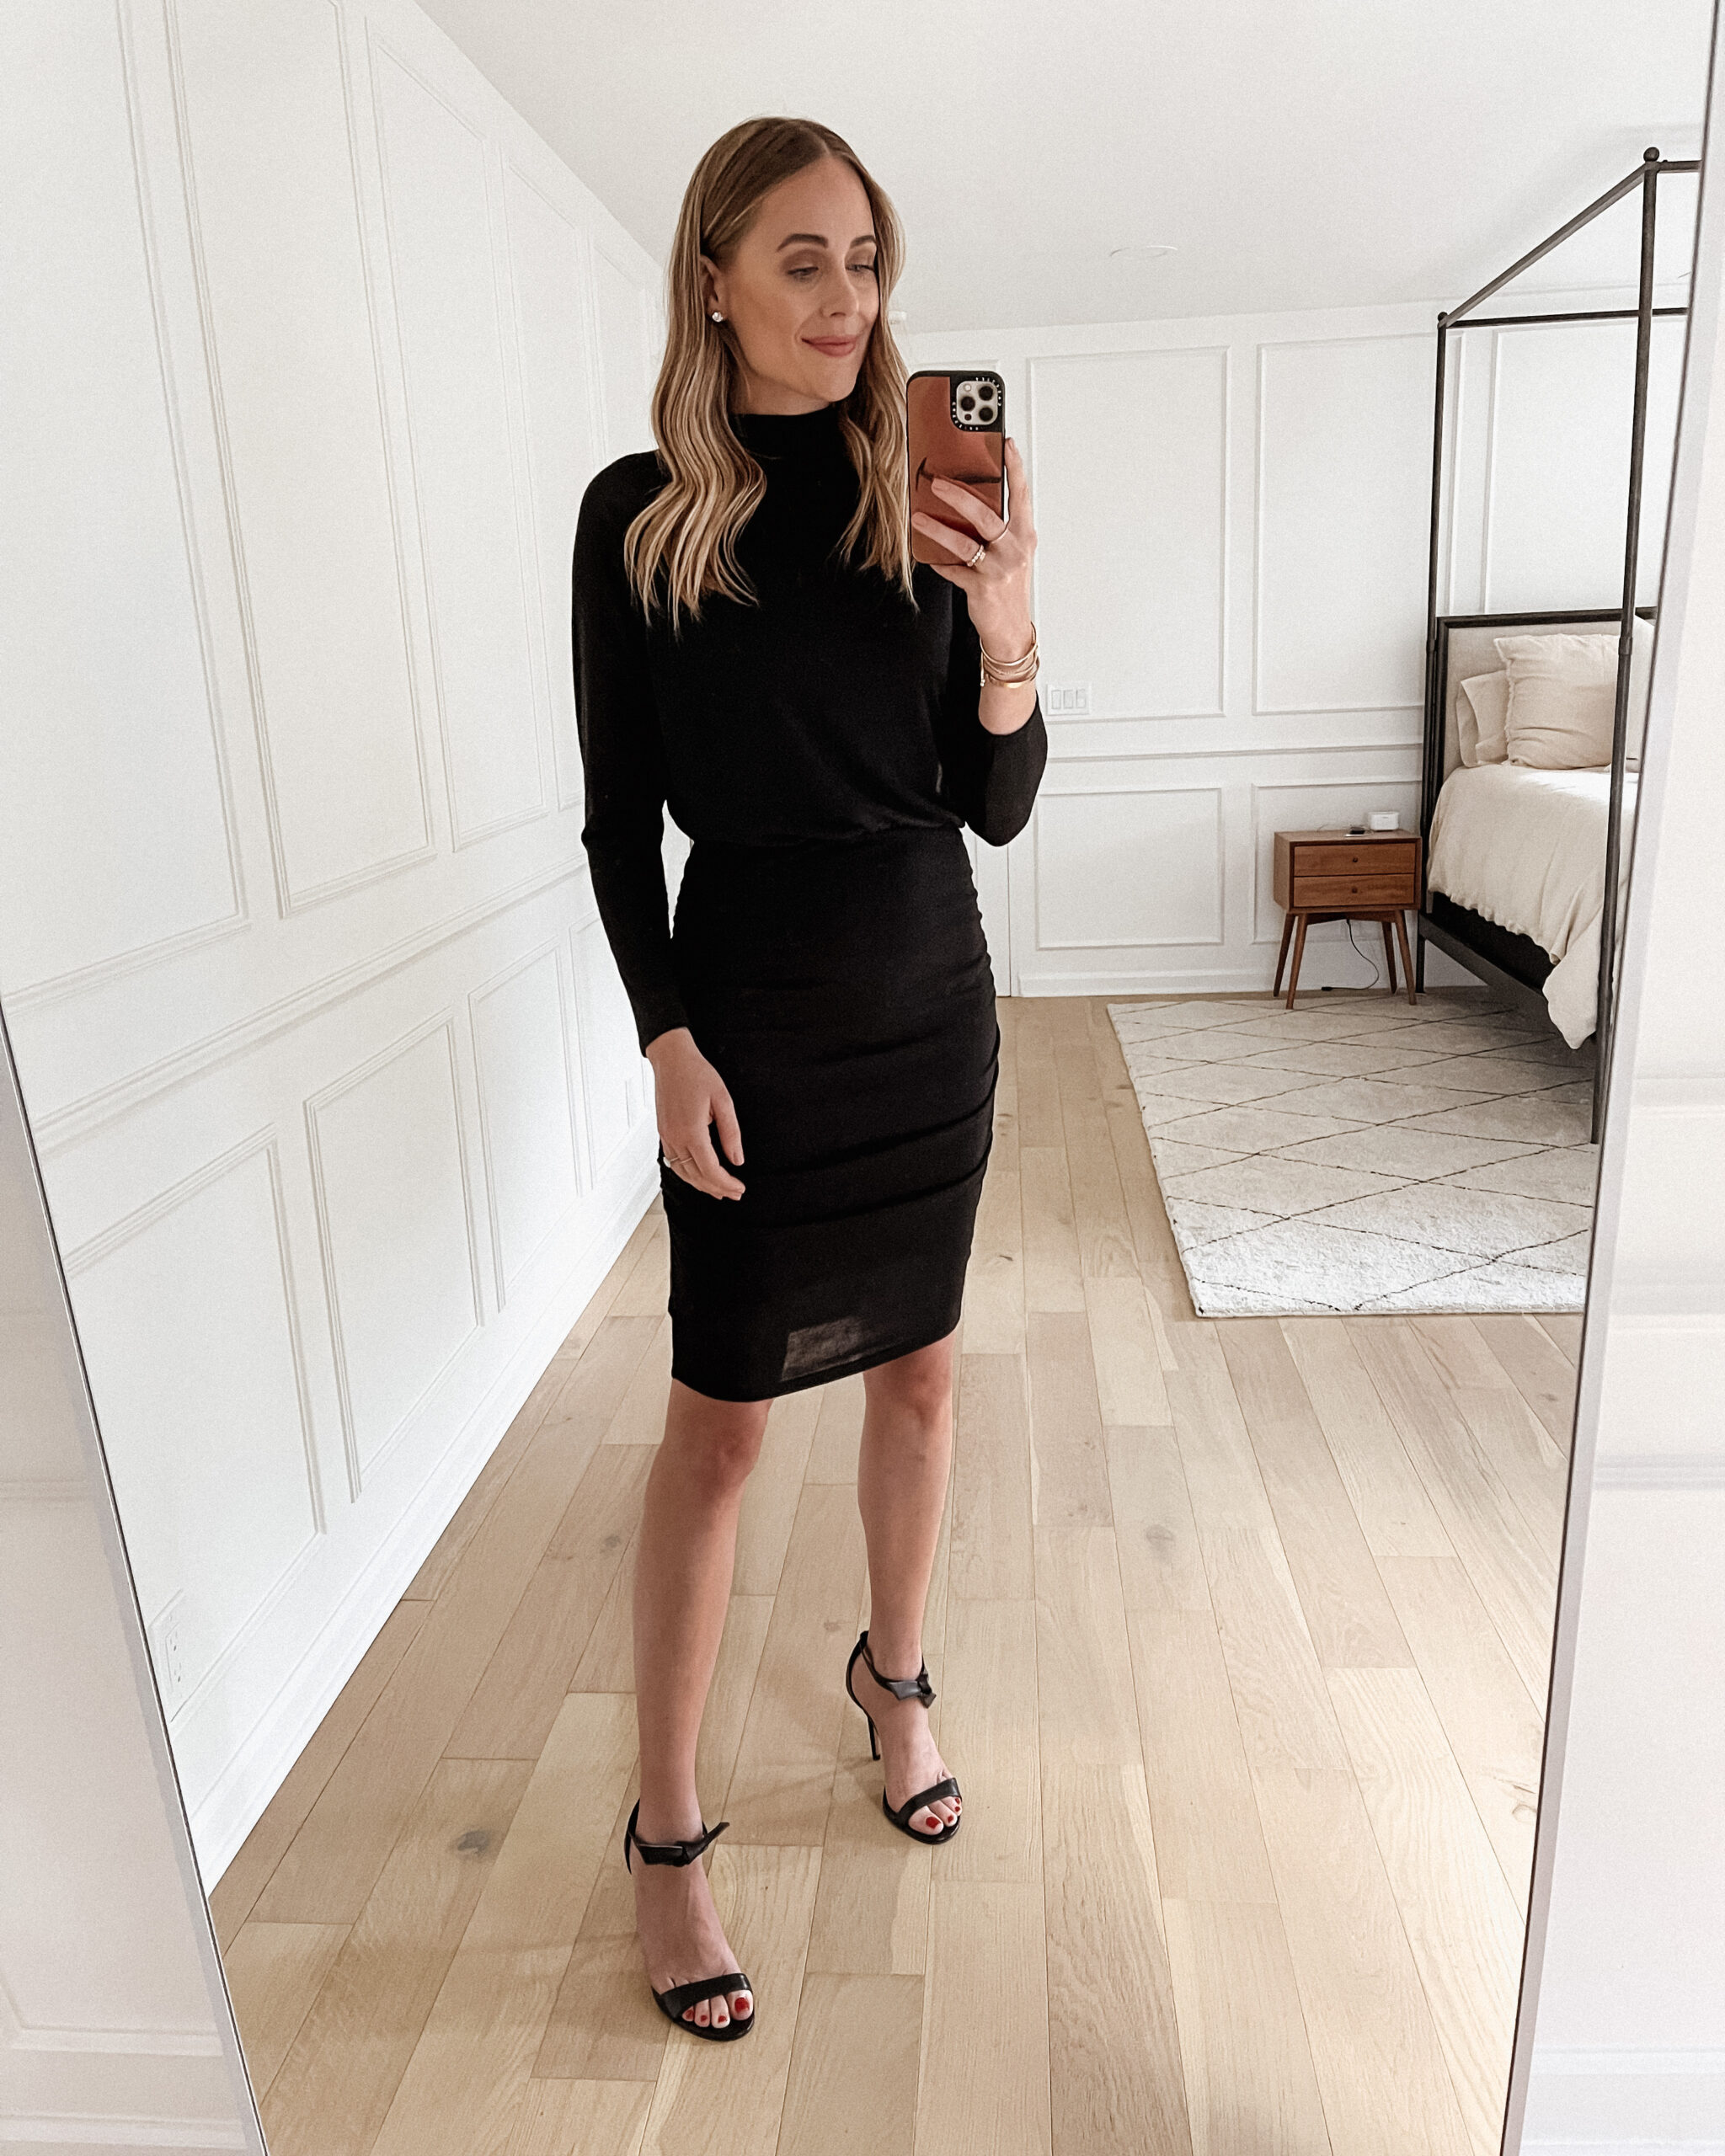 Fashion Jackson Wearing Express Black Long Sleeve Ruched Dress Black Heeled Sandals womens workwear outfit ideas